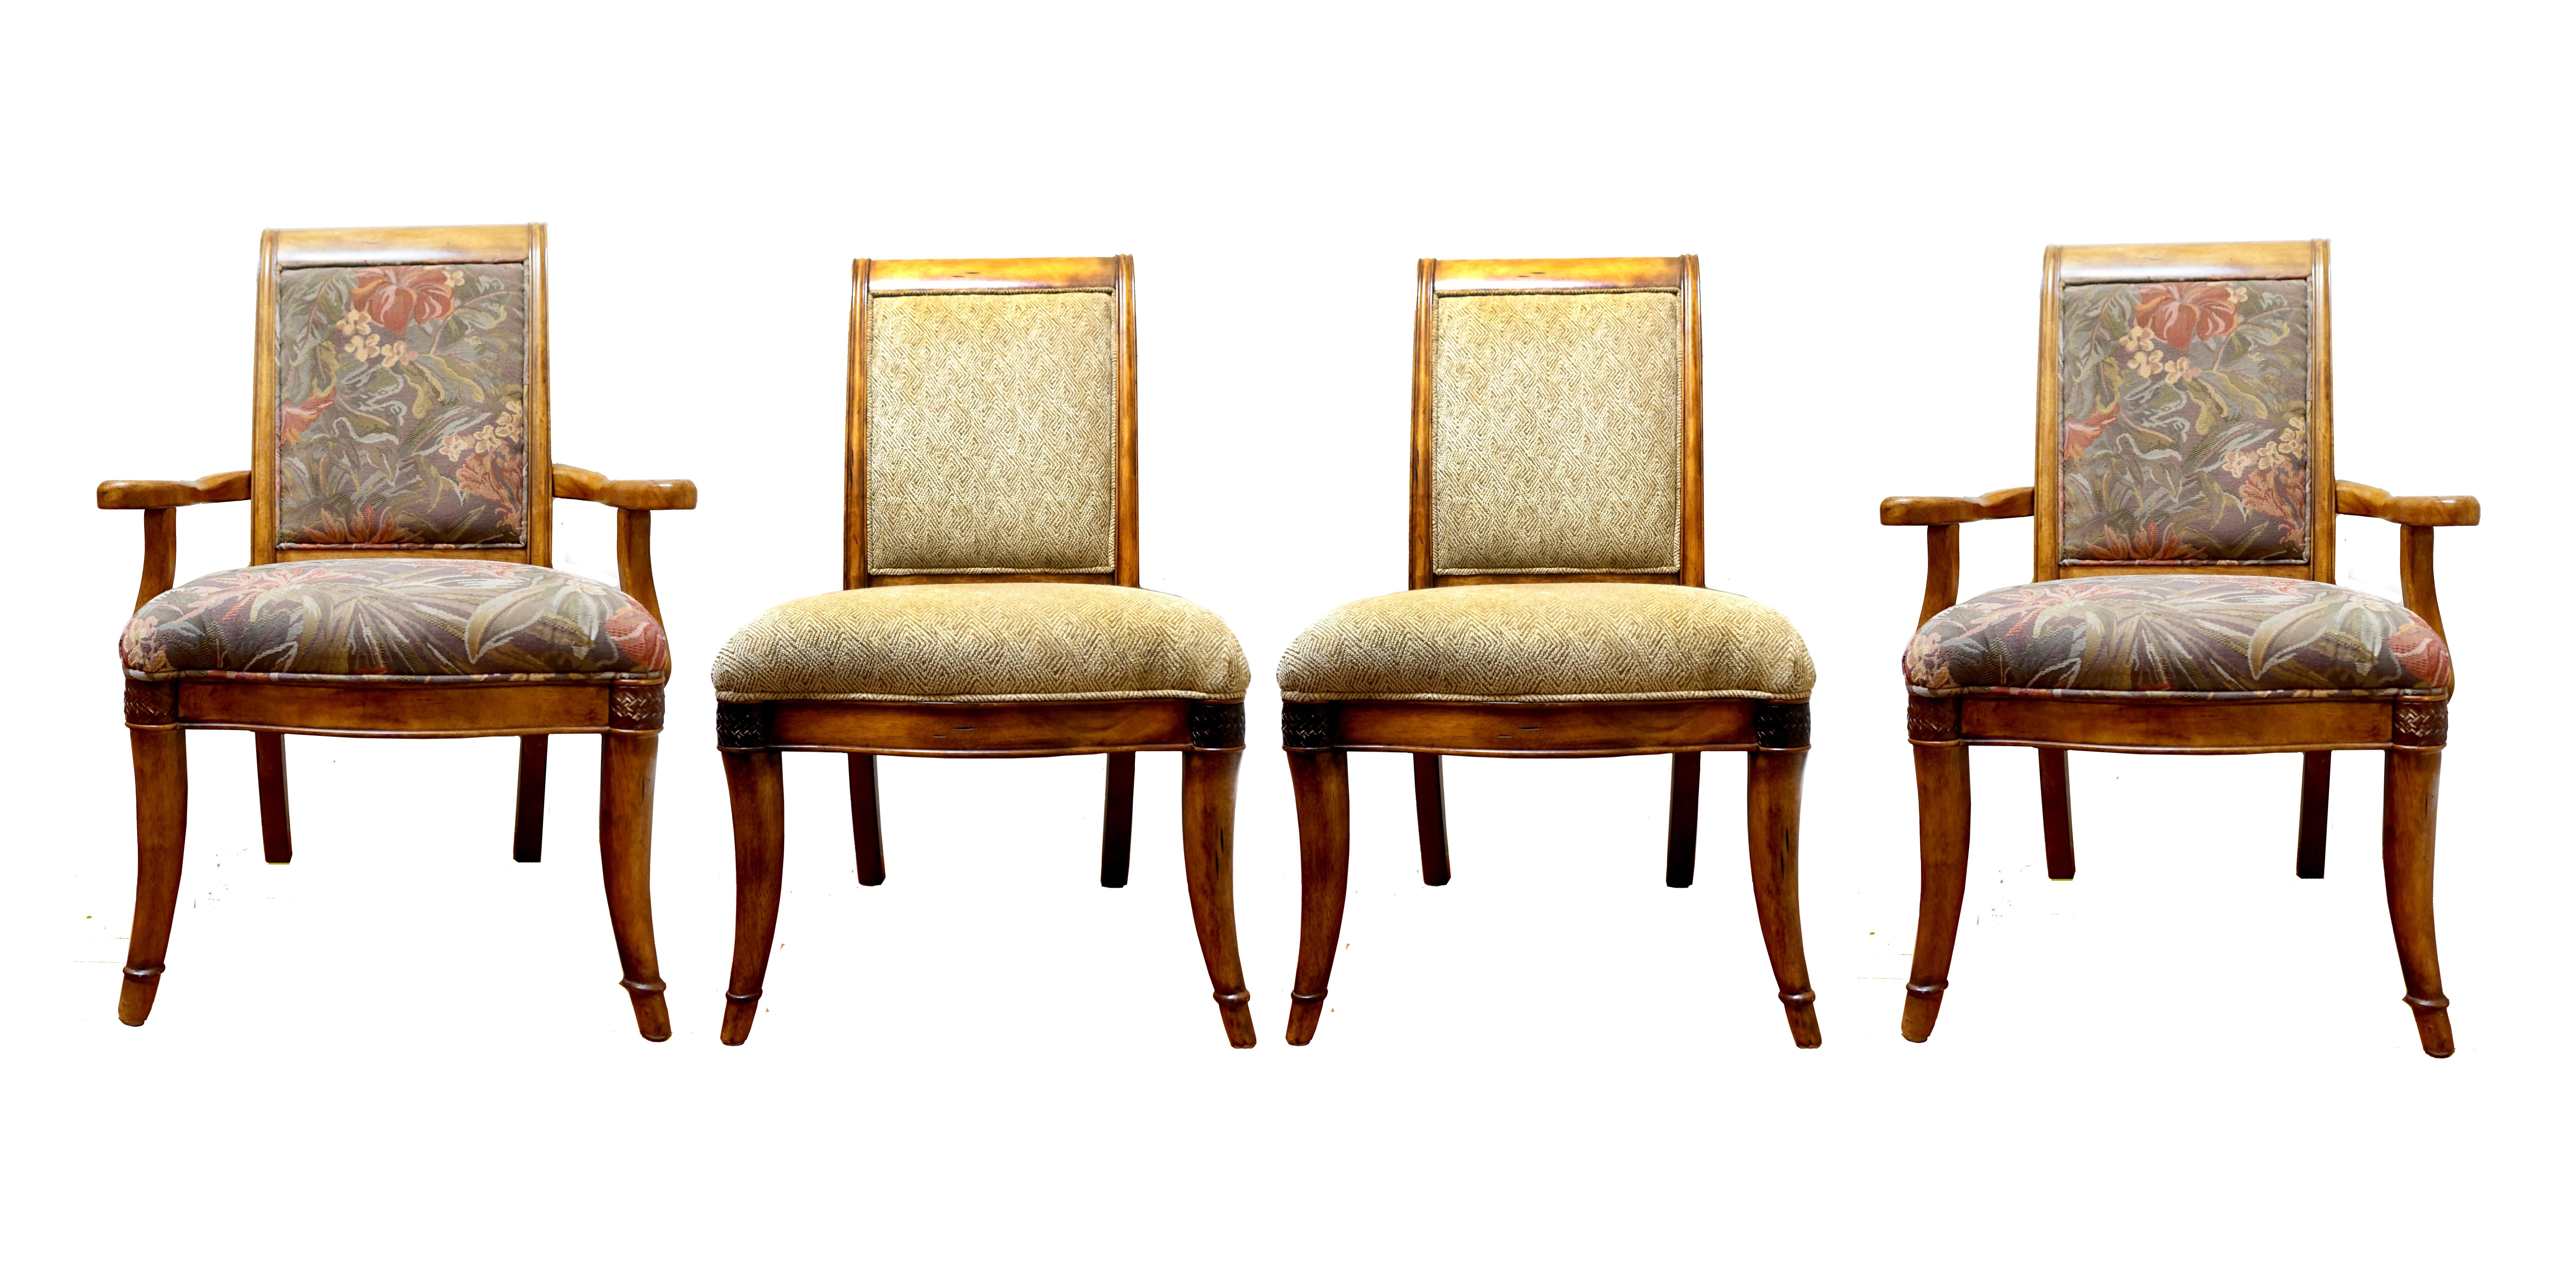 Schnadig William IV Dining Room Set 8 Chairs Burl Wood Table with 2 Leaves In Good Condition For Sale In Lomita, CA